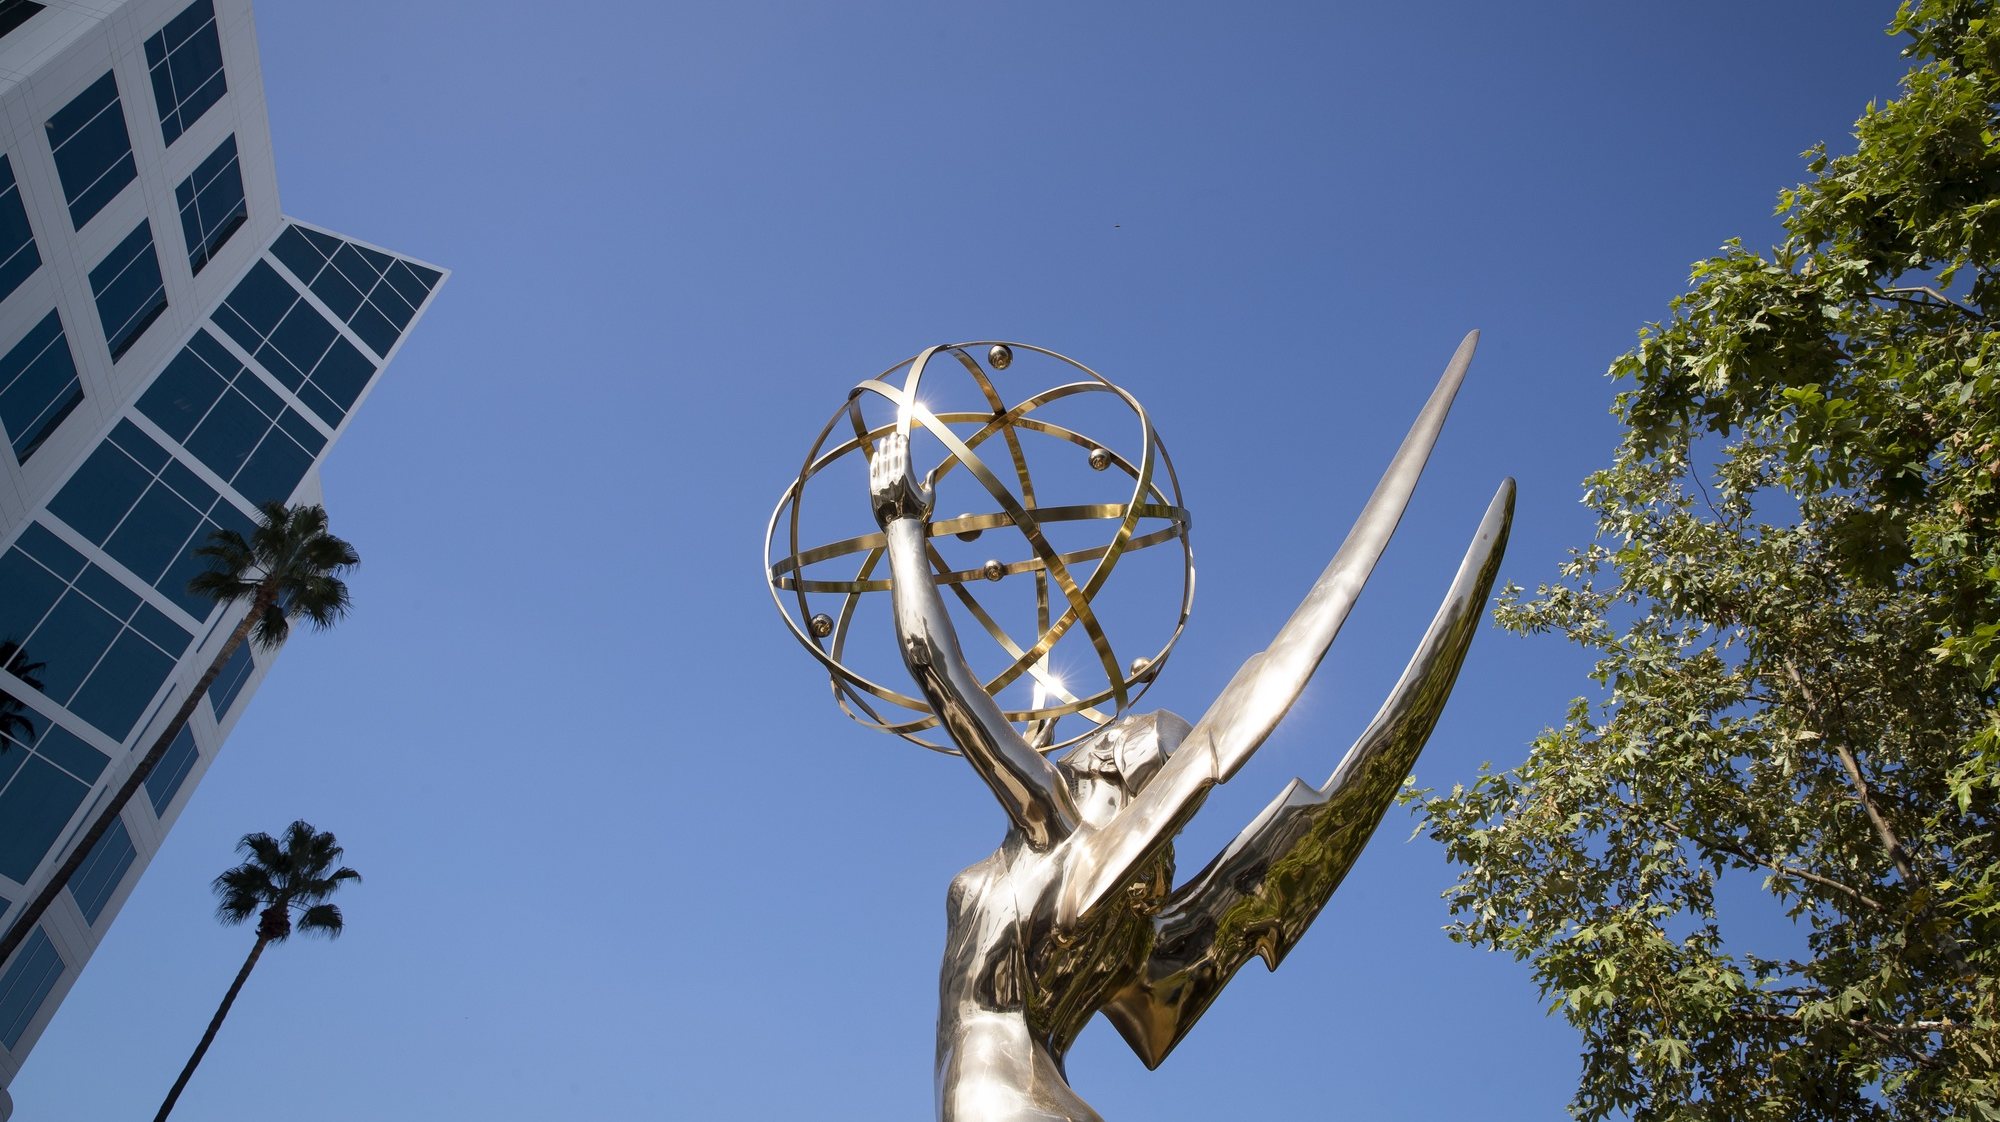 epa09470509 A large Emmy statuette is displayed during a press preview for the 2021 Emmy Awards telecast at the Television Academy in Los Angeles, California, USA, 15 September 2021. The preview included drinks, food and show elements that will be present for nominees and guests at the 73rd Emmy Awards telecast on 19 September 2021.  EPA/CAROLINE BREHMAN